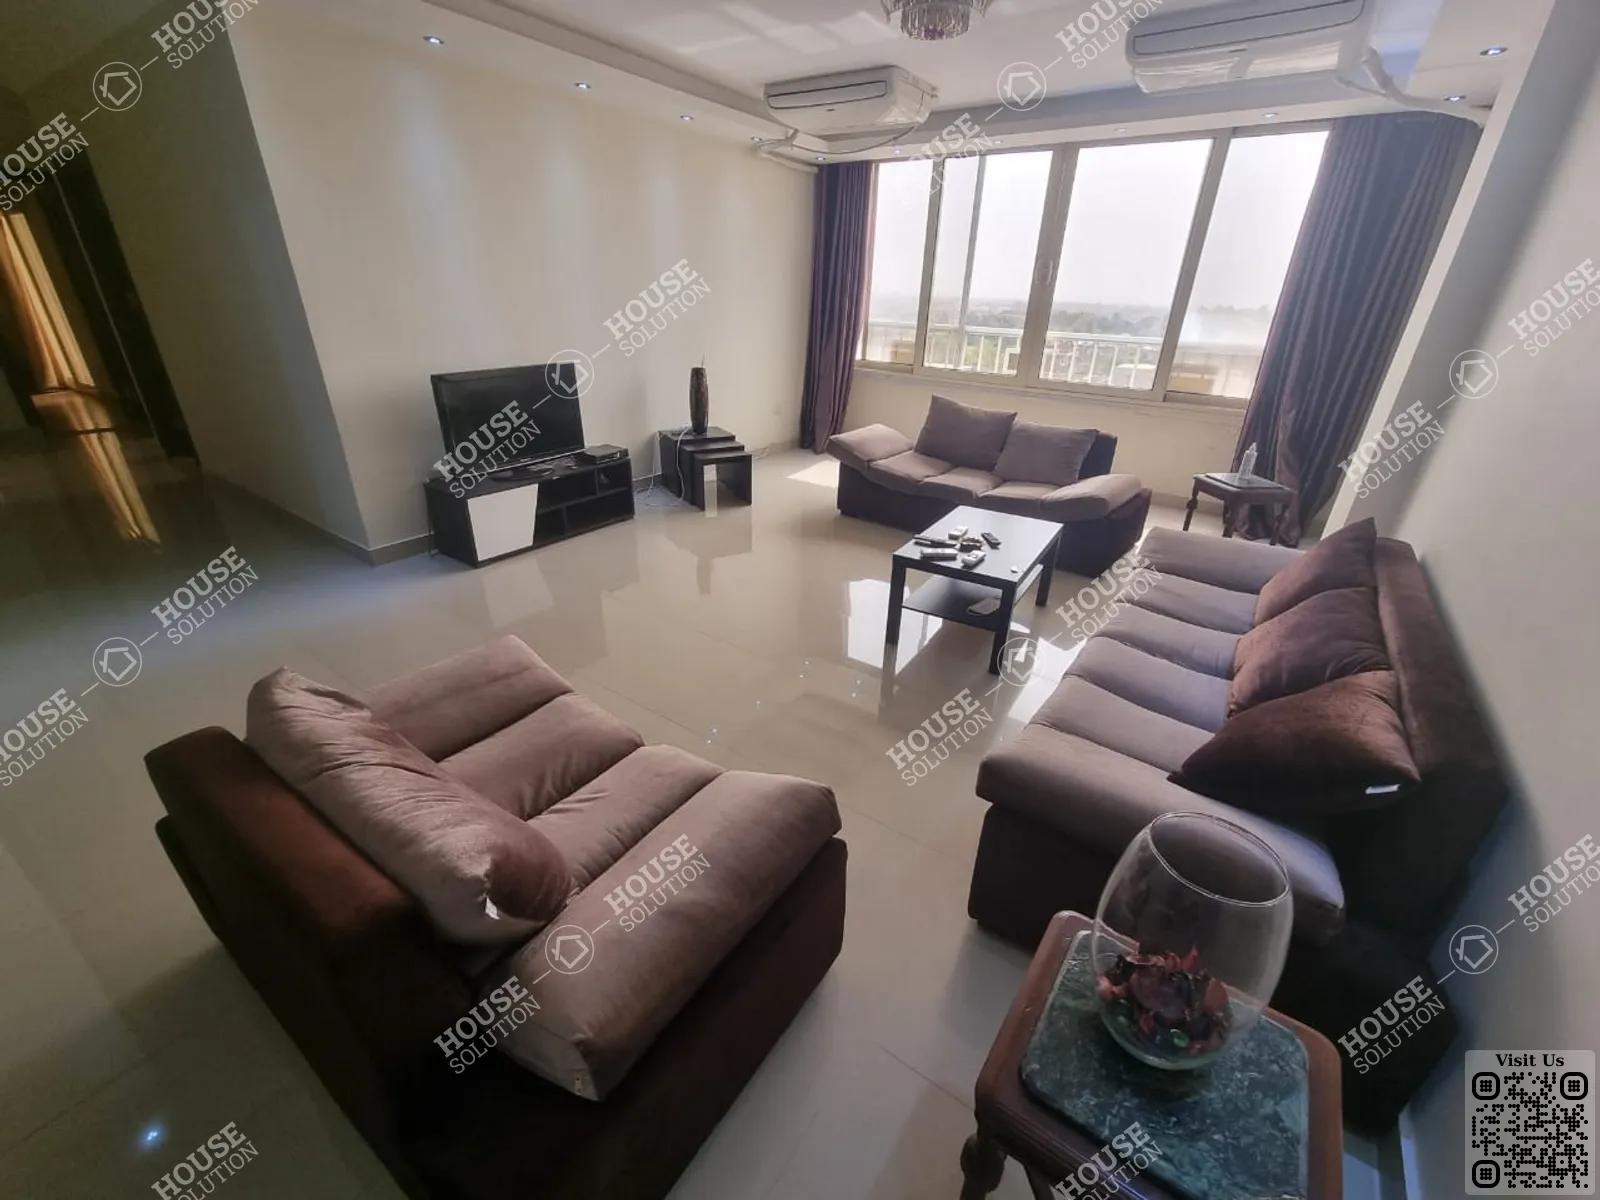 RECEPTION  @ Apartments For Rent In Maadi Maadi Sarayat Area: 180 m² consists of 3 Bedrooms 2 Bathrooms Modern furnished 5 stars #5410-2